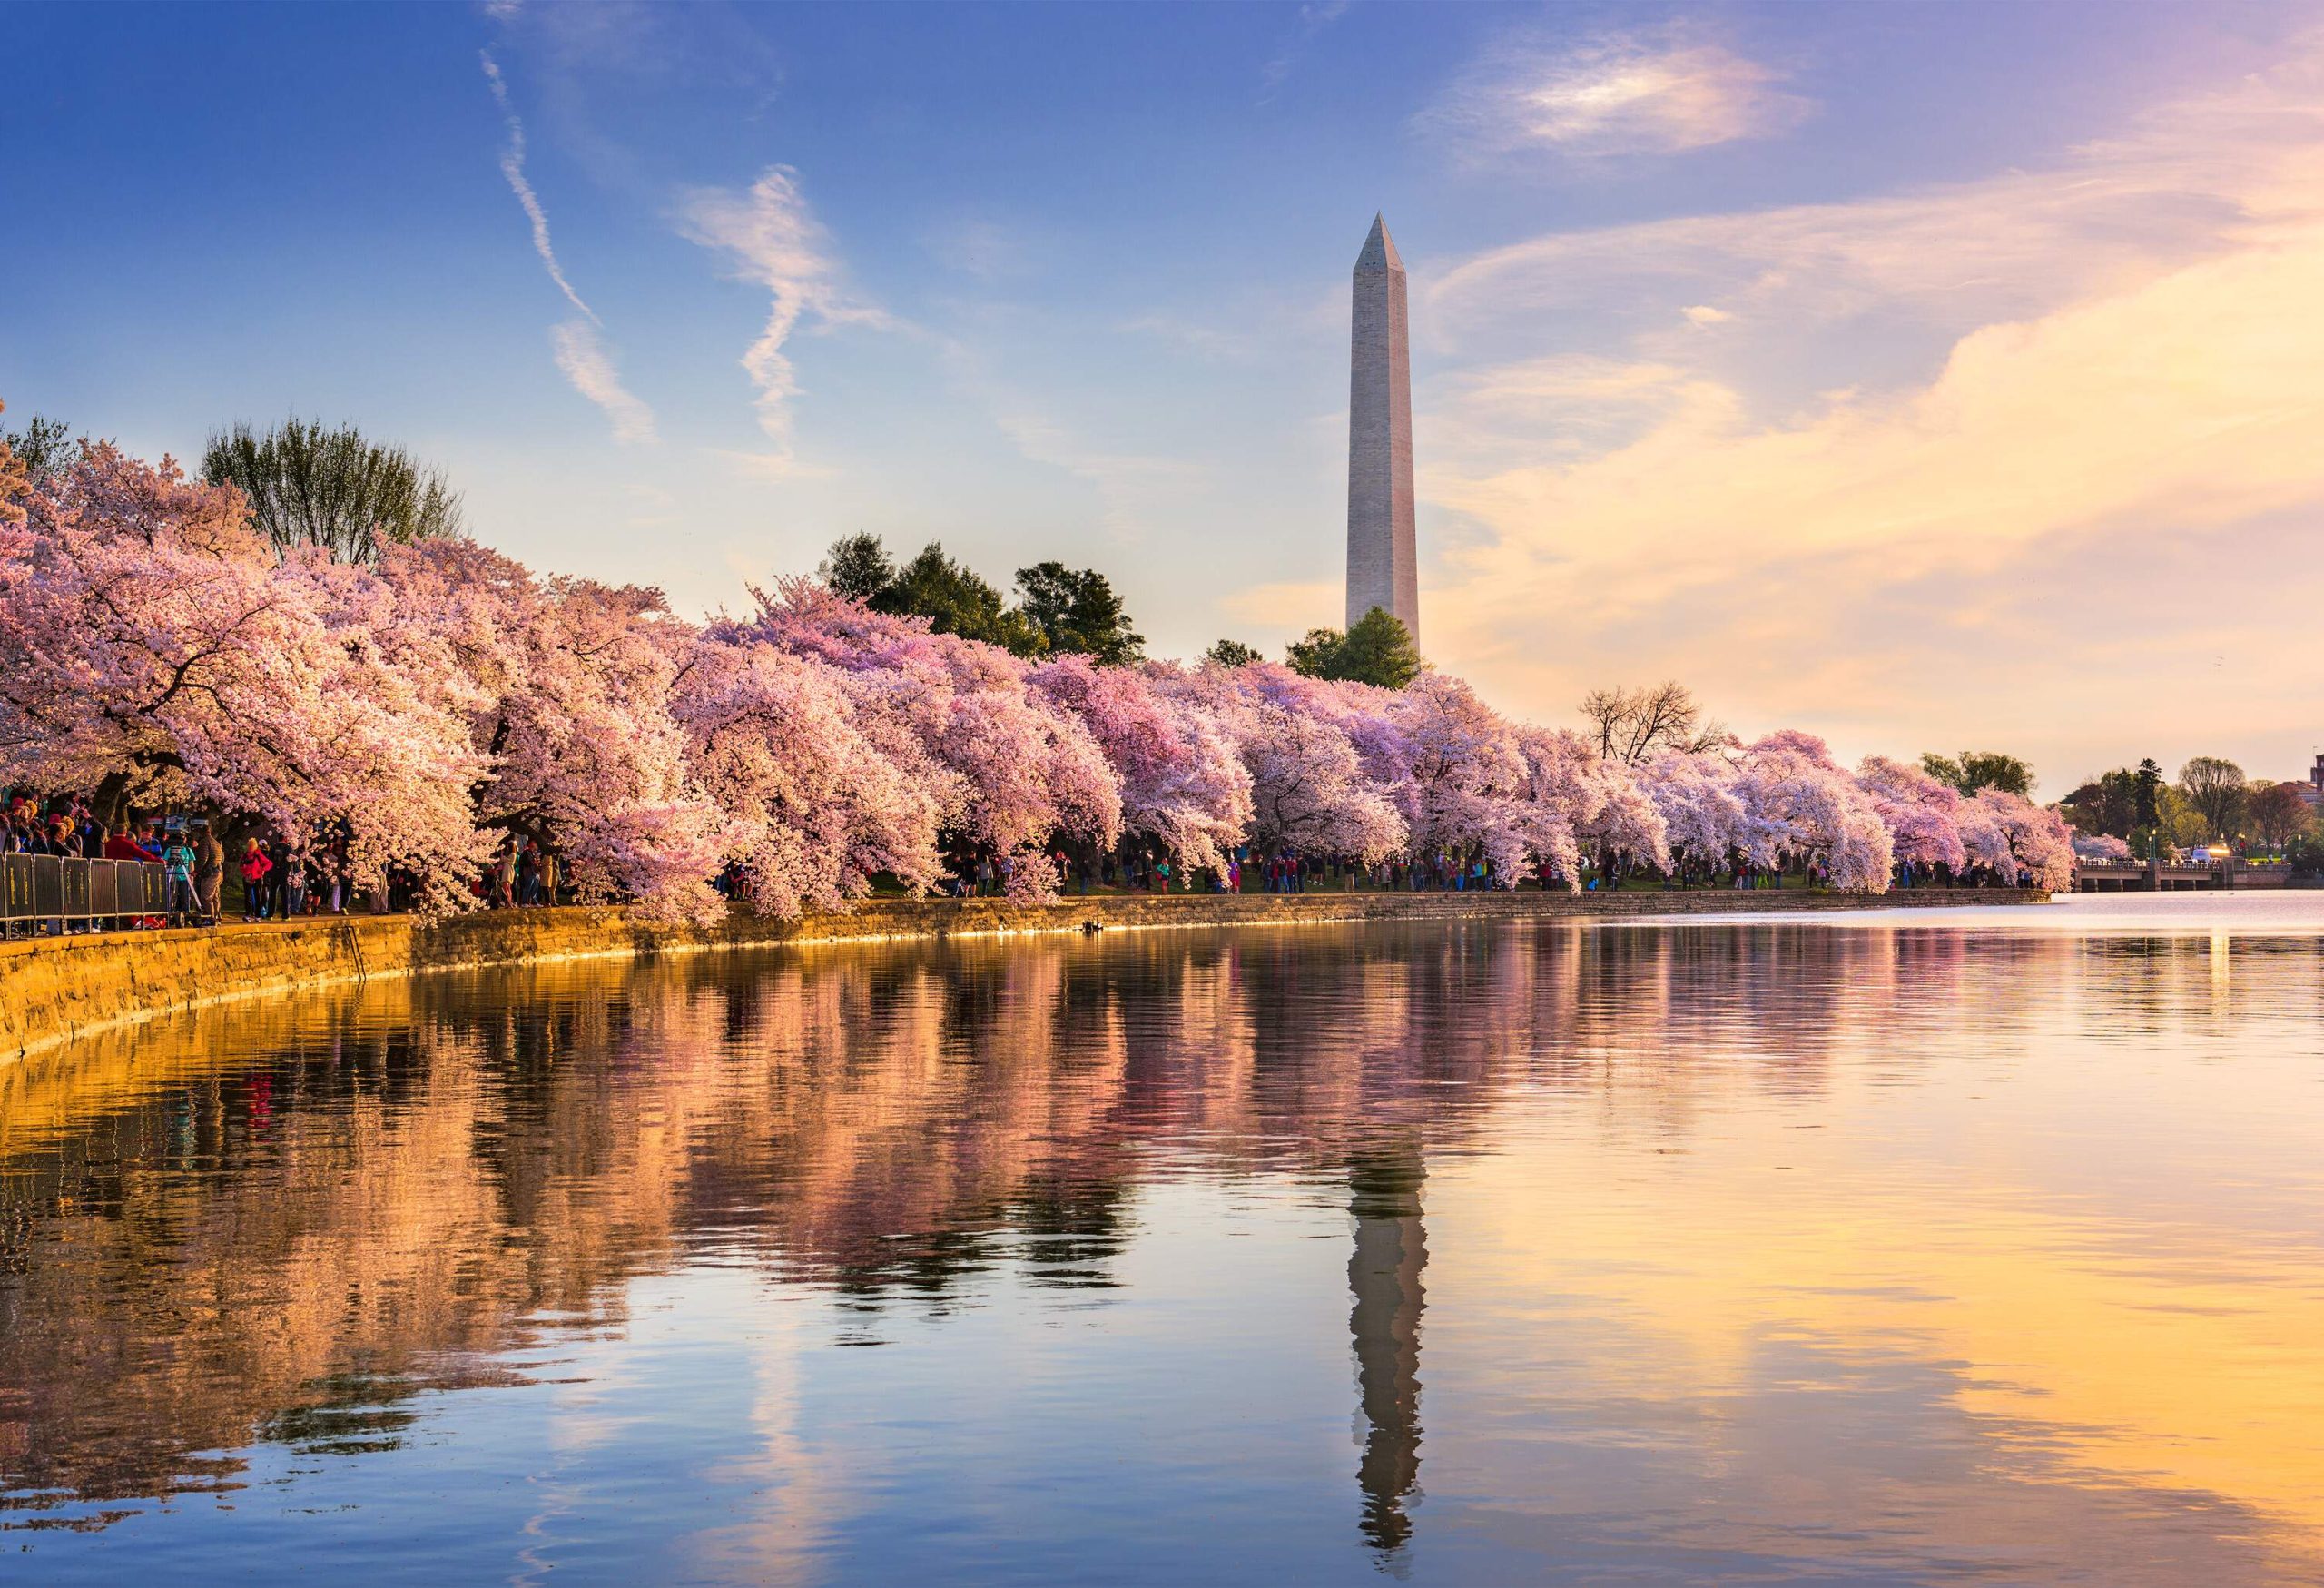 The Tidal Basin surrounded by beautiful cherry blossom trees in full bloom with a view of an imposing Washington Monument.